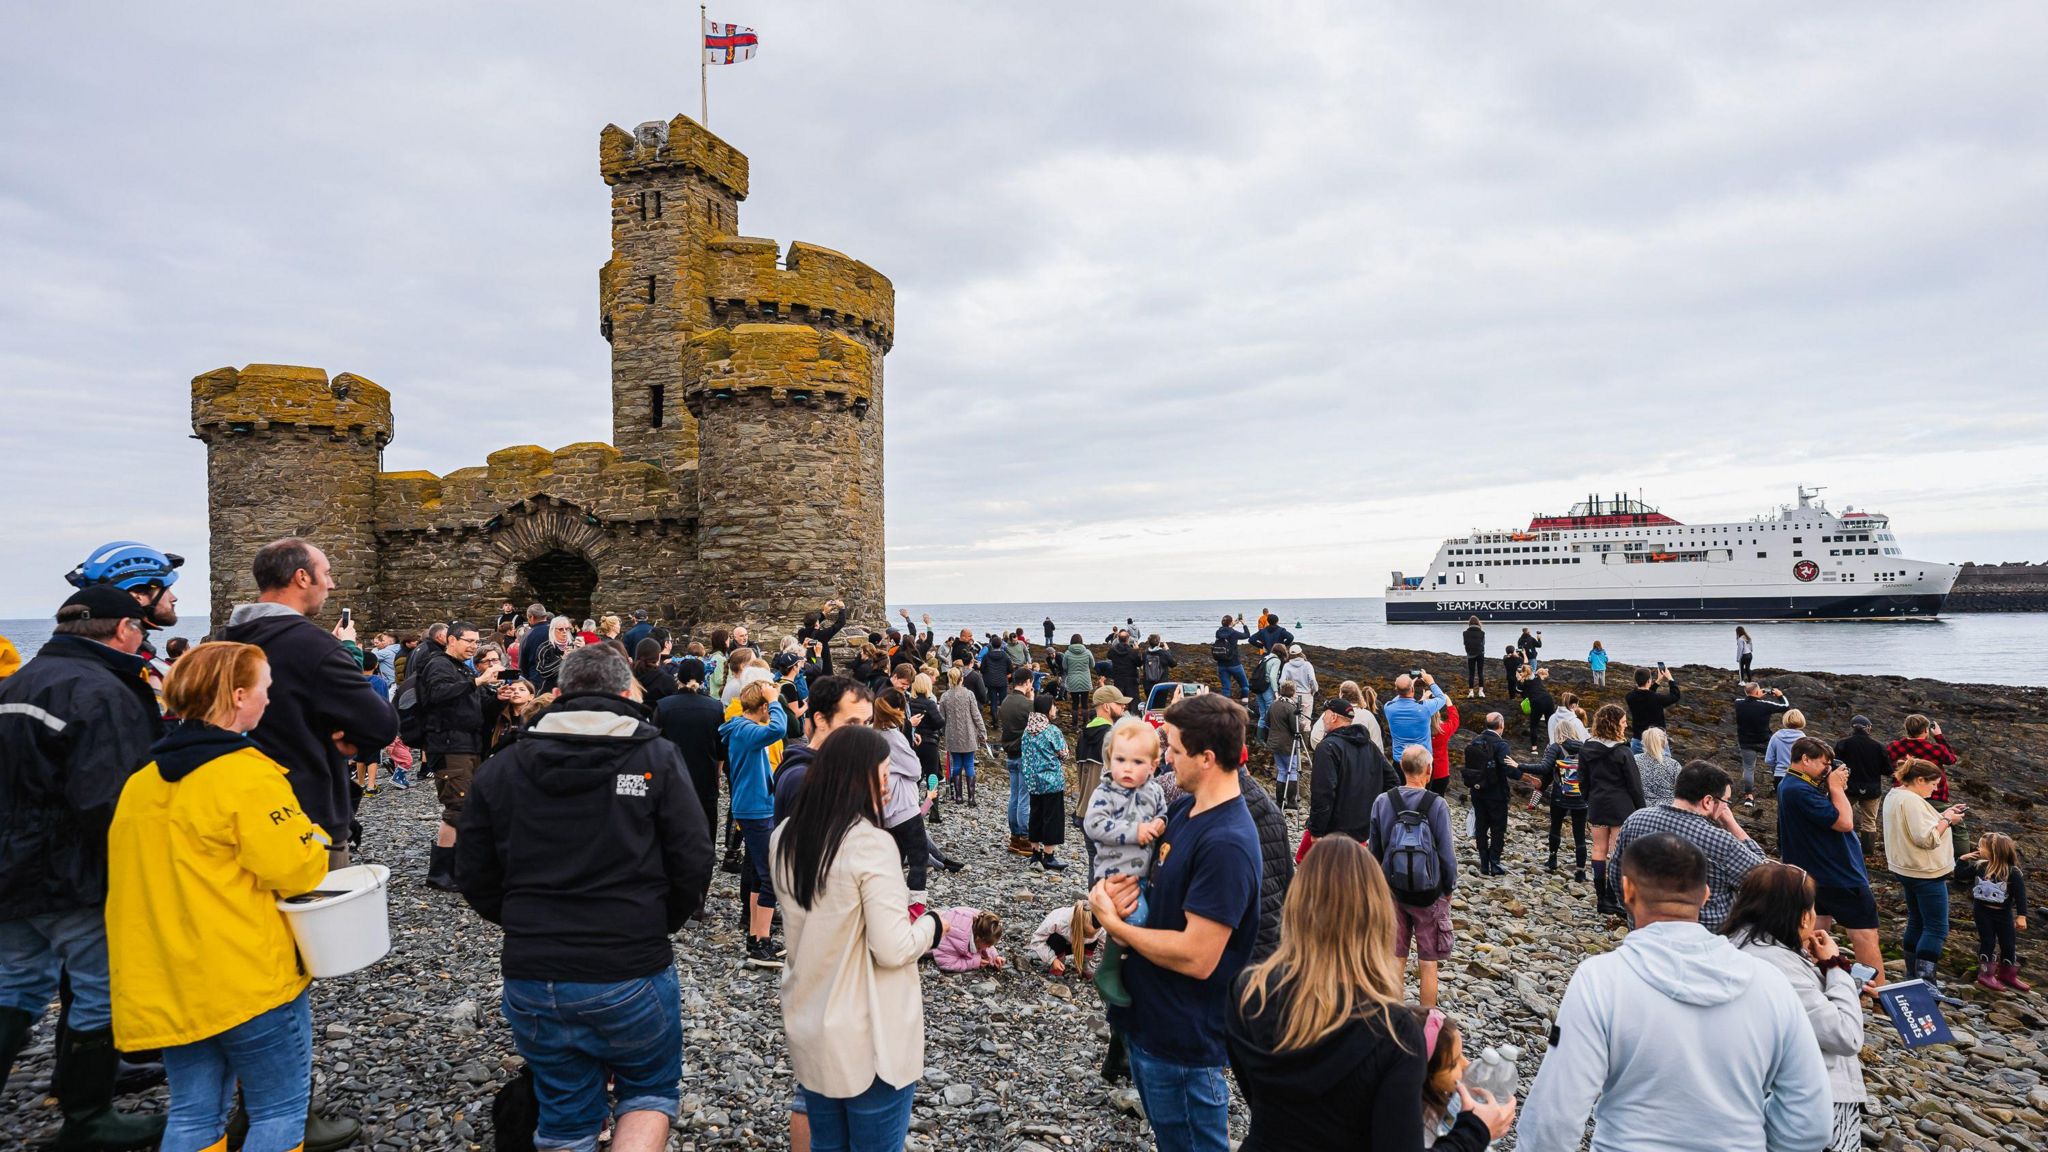 Crowds on the island with a tower with the ferry in the background